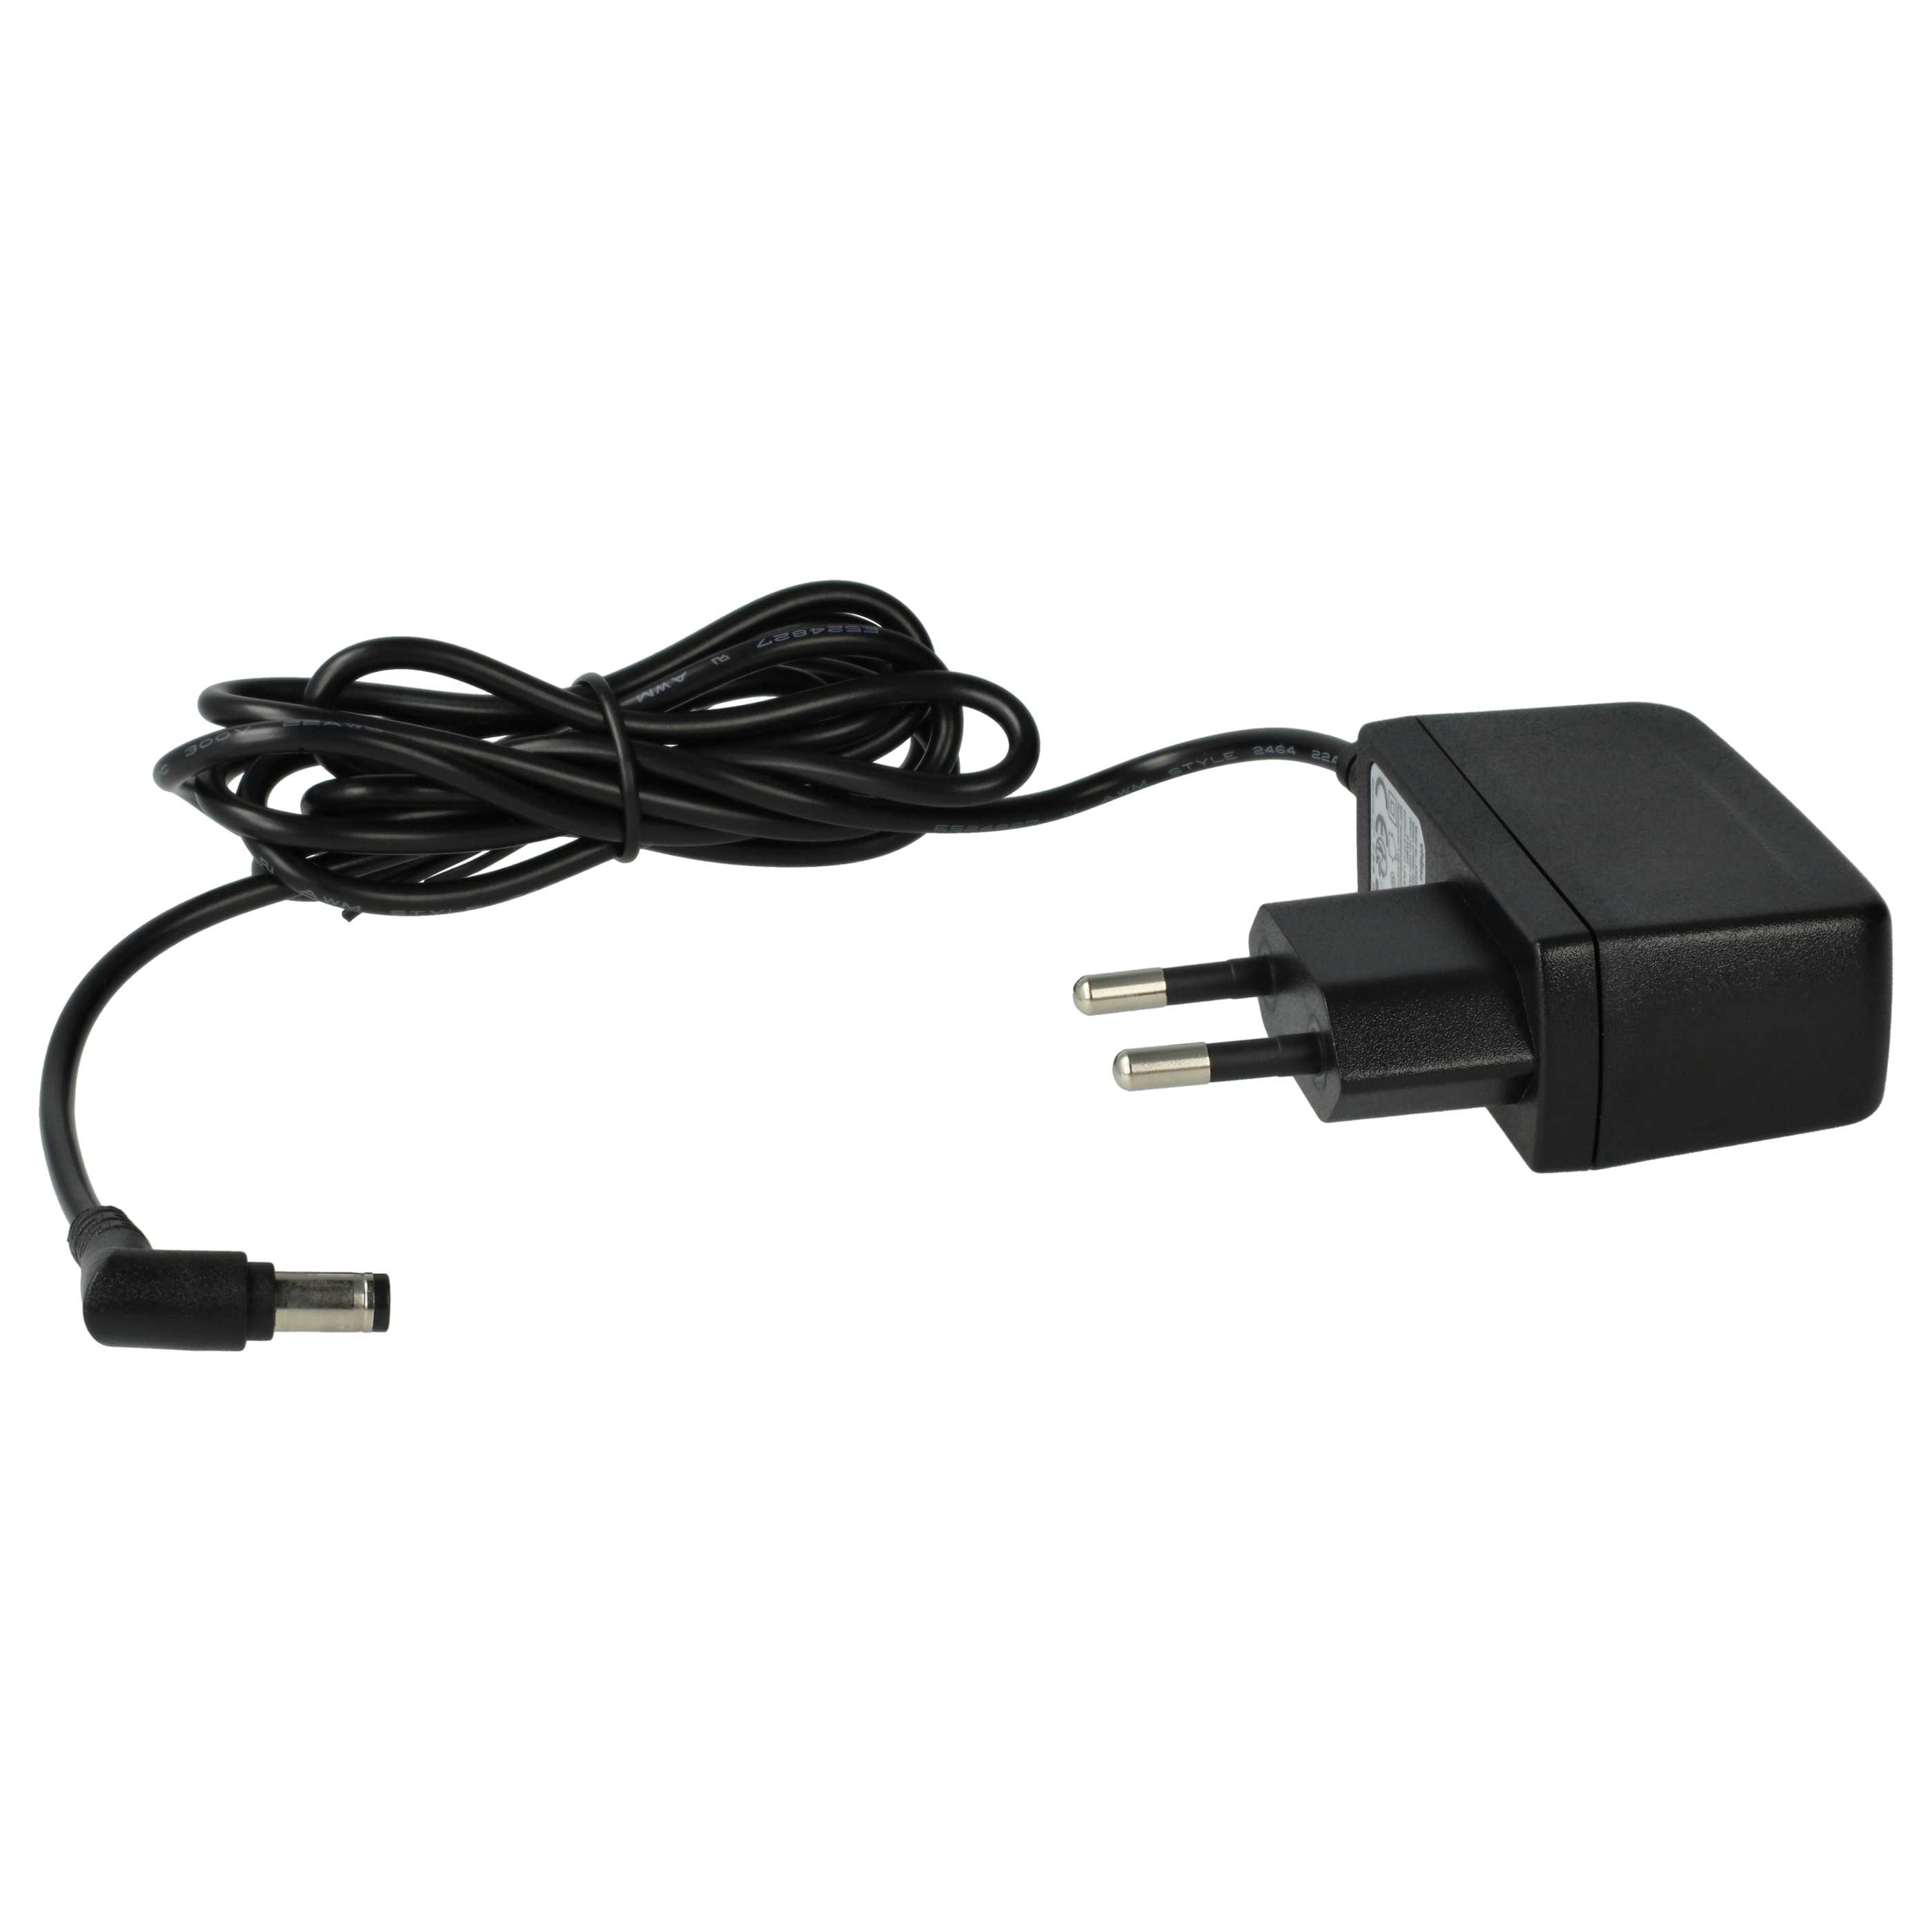 Mains Power Adapter replaces Tiptel 3054061 for TipTel Landline Telephone, Home Telephone - 145 cm